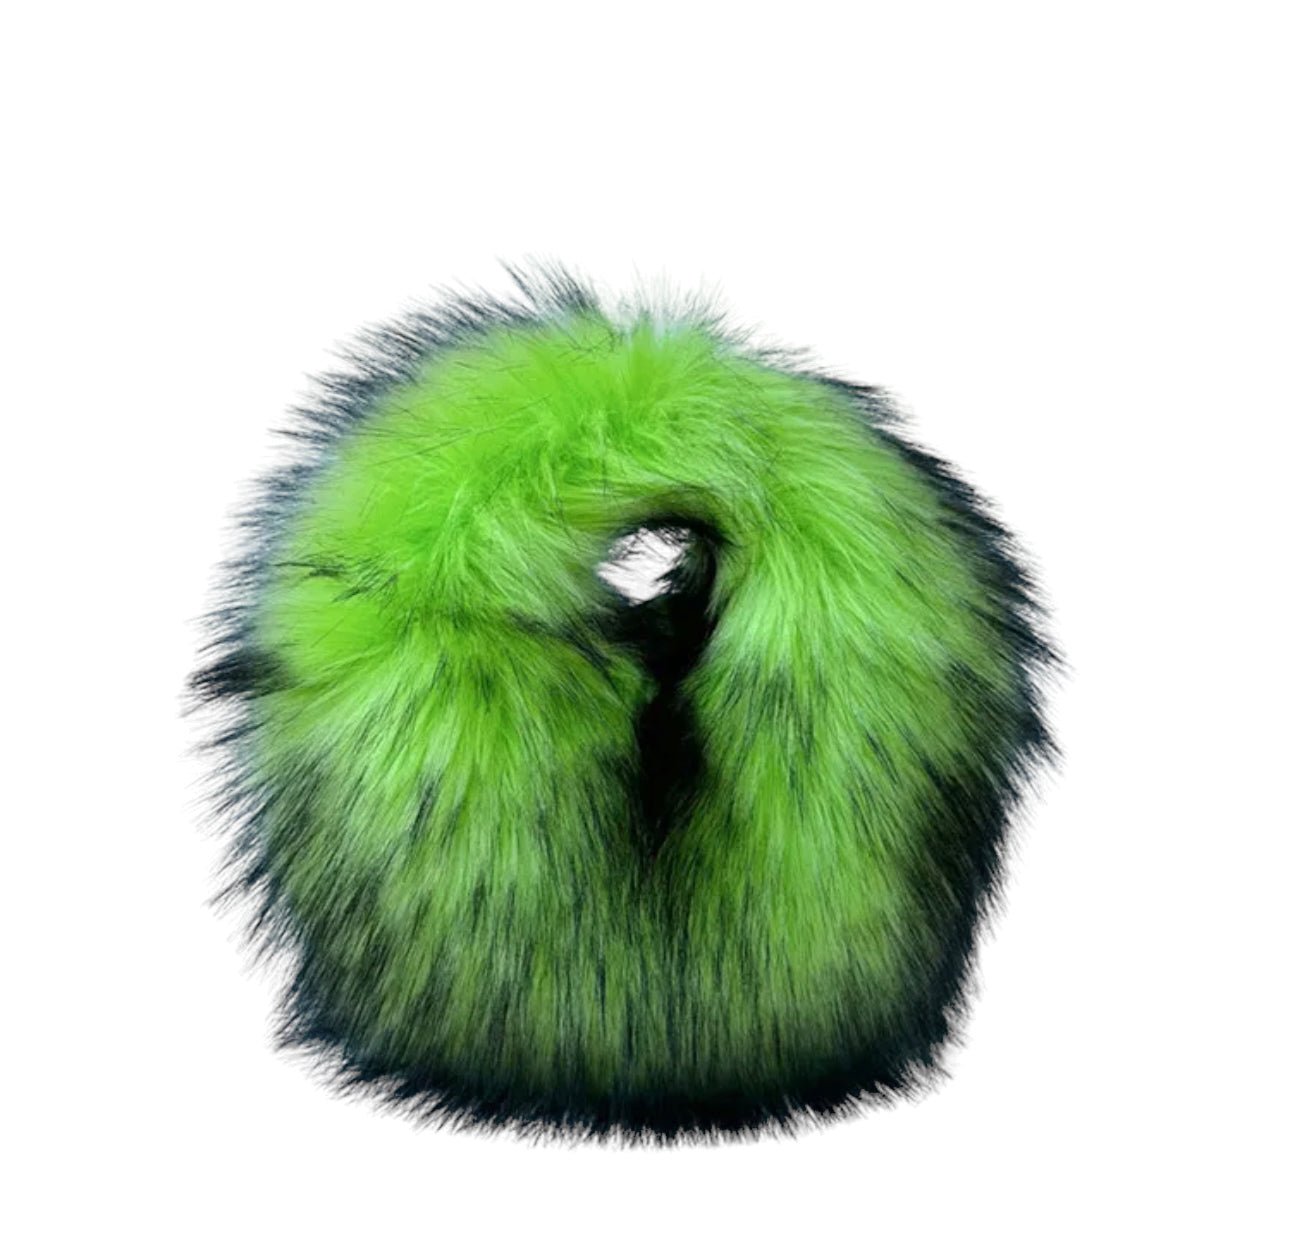 Fuzzy Feeling Bag - Accessories spo-cs-disabled, spo-default, spo-disabled, spo-notify-me-disabled